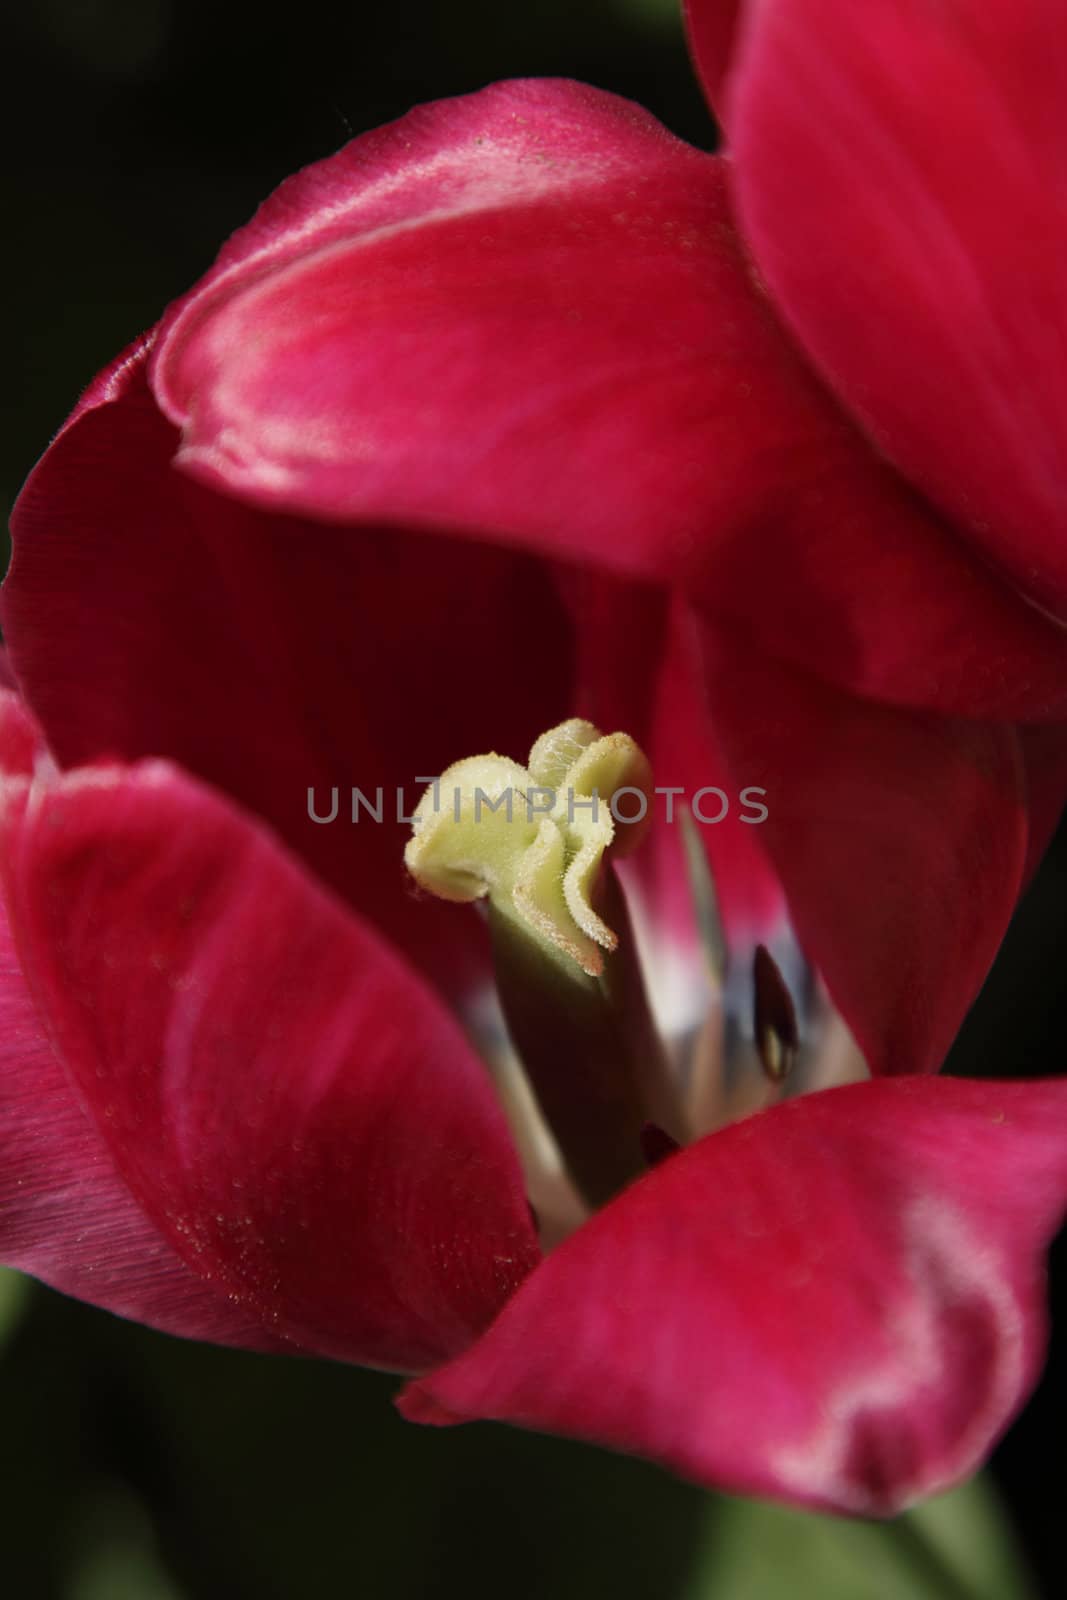 Close up photo of red tulip, shallow depth of field